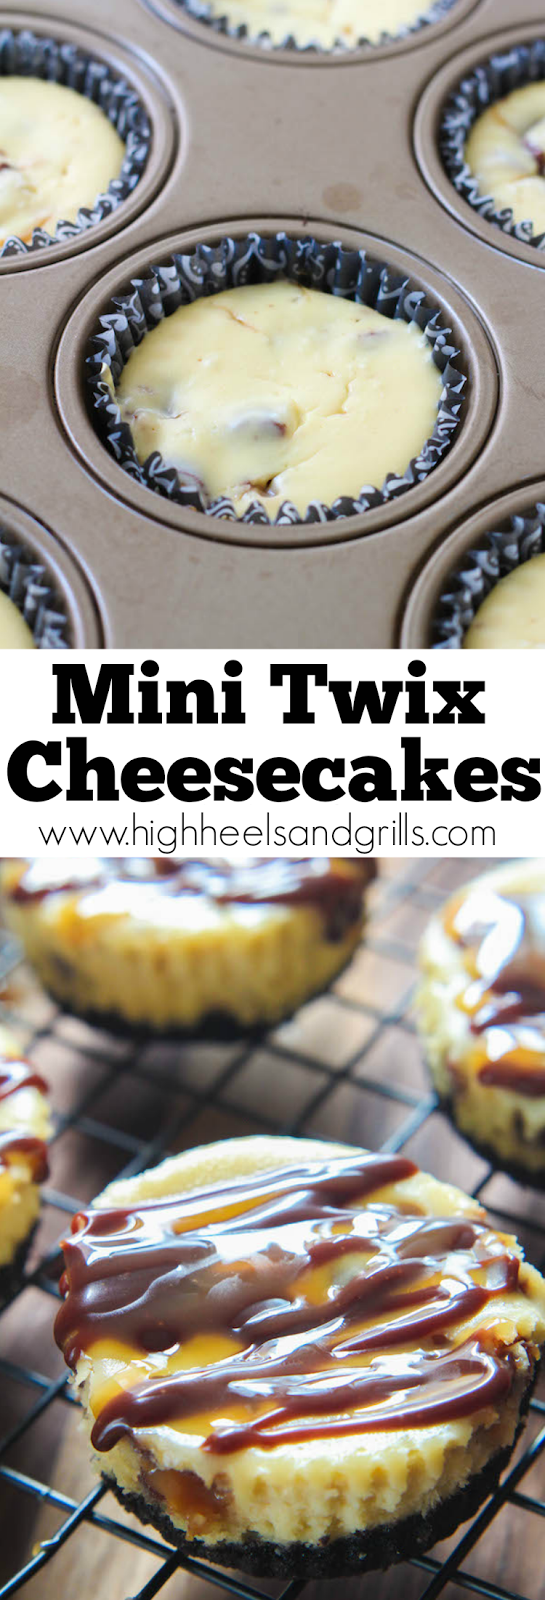 Mini Twix Cheesecakes - Everything about these is amazing. They're creamy and smooth, with an Oreo bottom and the chocolate/caramel combo is amazing!